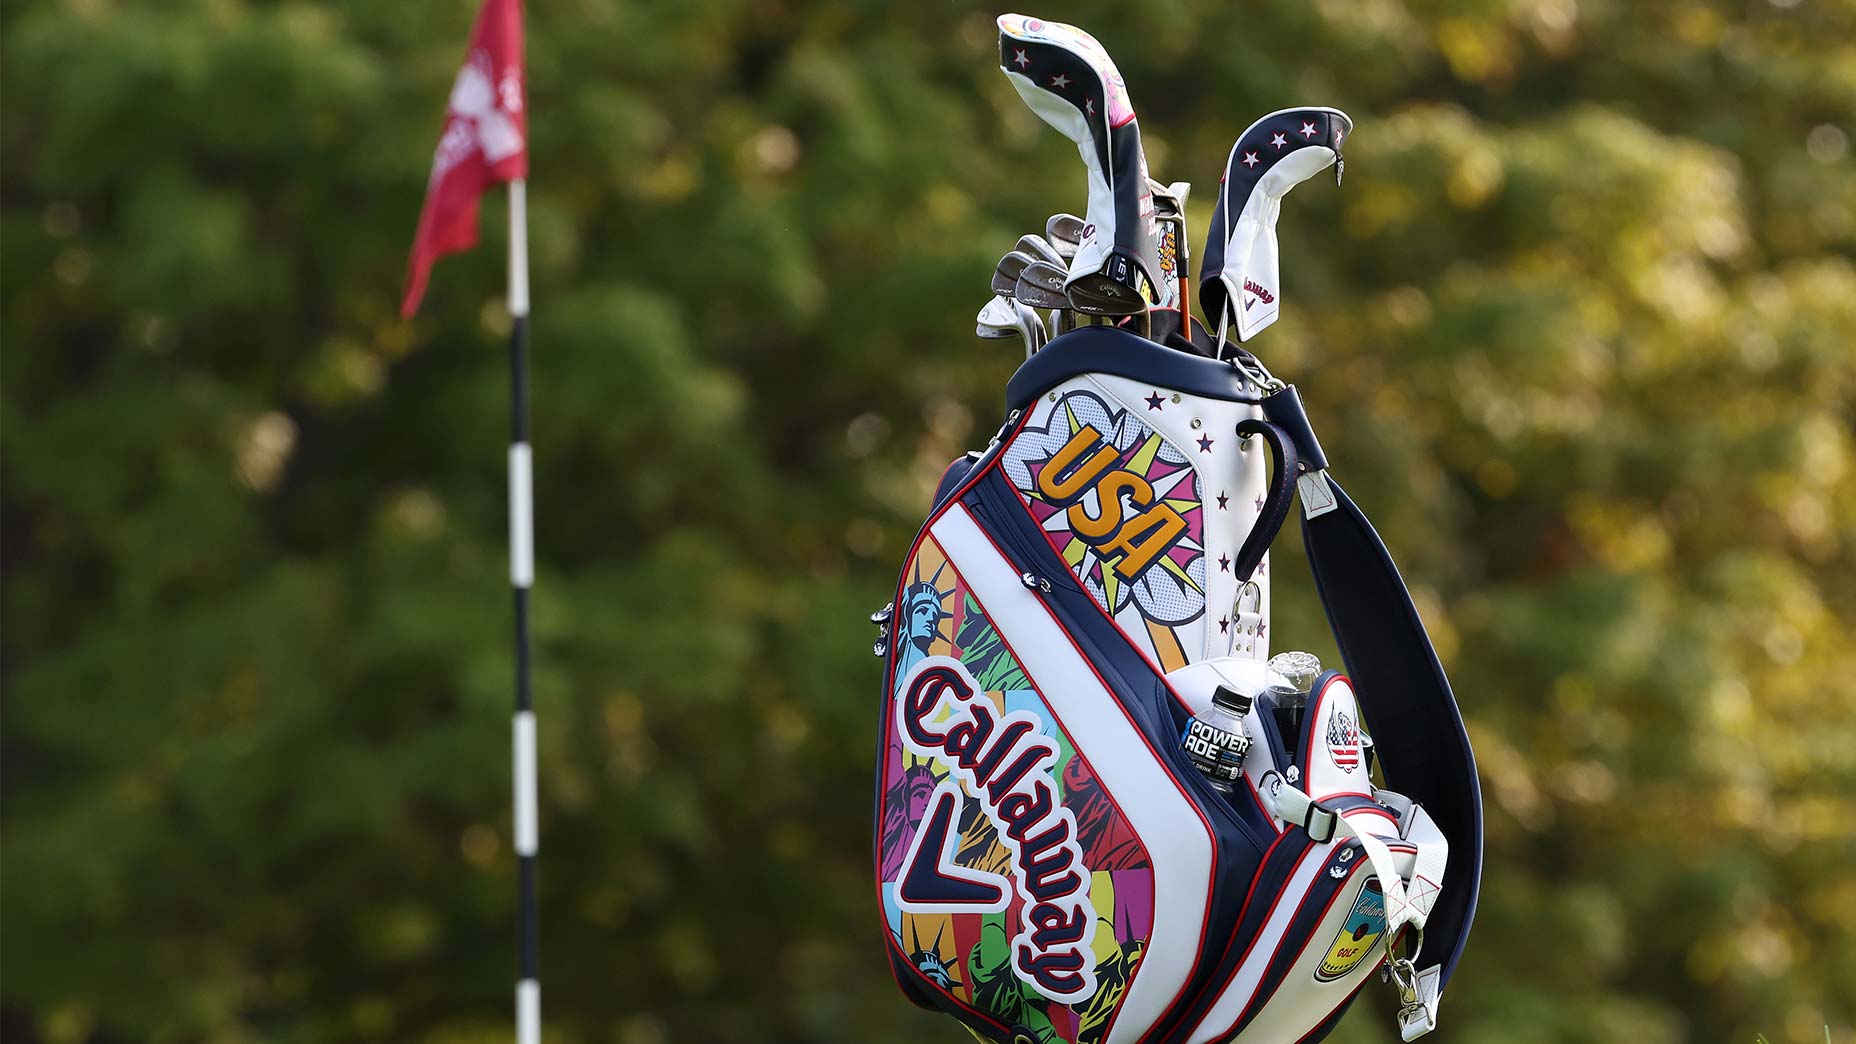 PHOTOS: Check out Callaway's eye-catching U.S. Open-themed golf bags